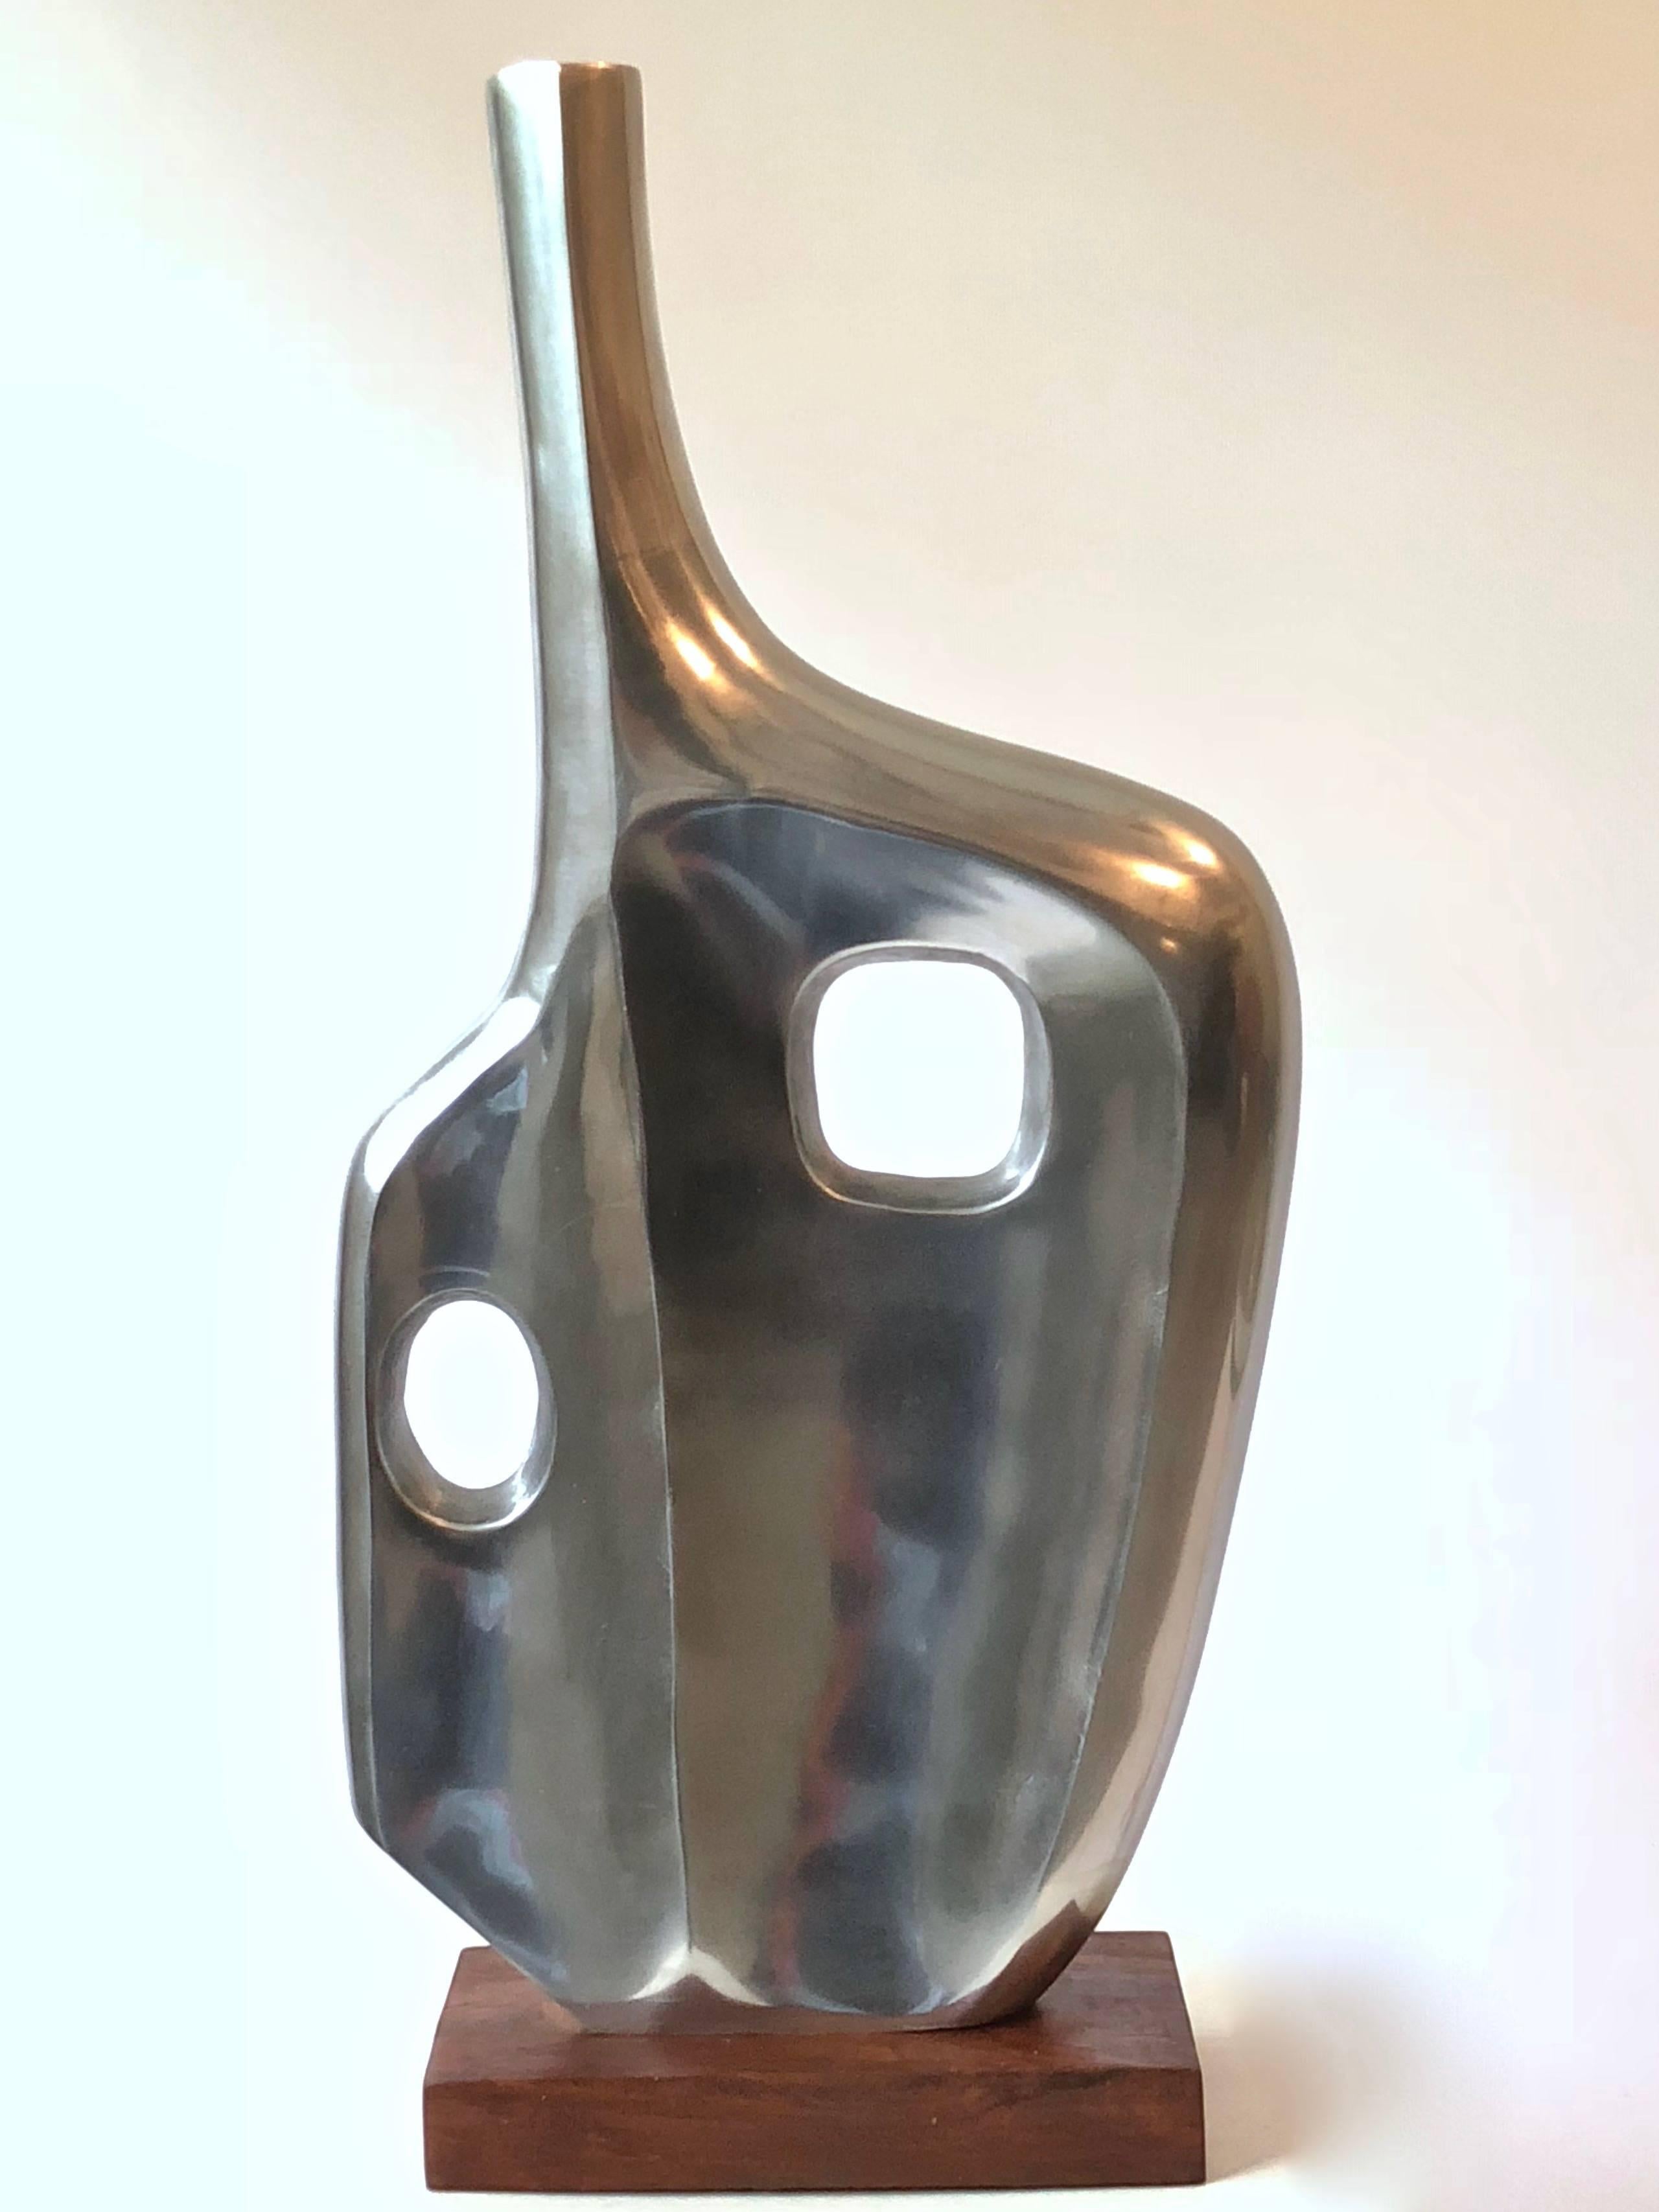 Graphic and large-scaled chromed abstract sculpture on black lacquered base, in the style of American sculptor, Dorothy Dehner (1901-1994). Similar piece published in October 2012, Elle Decor, Ivanka Trump's Living Room on Park Avenue.